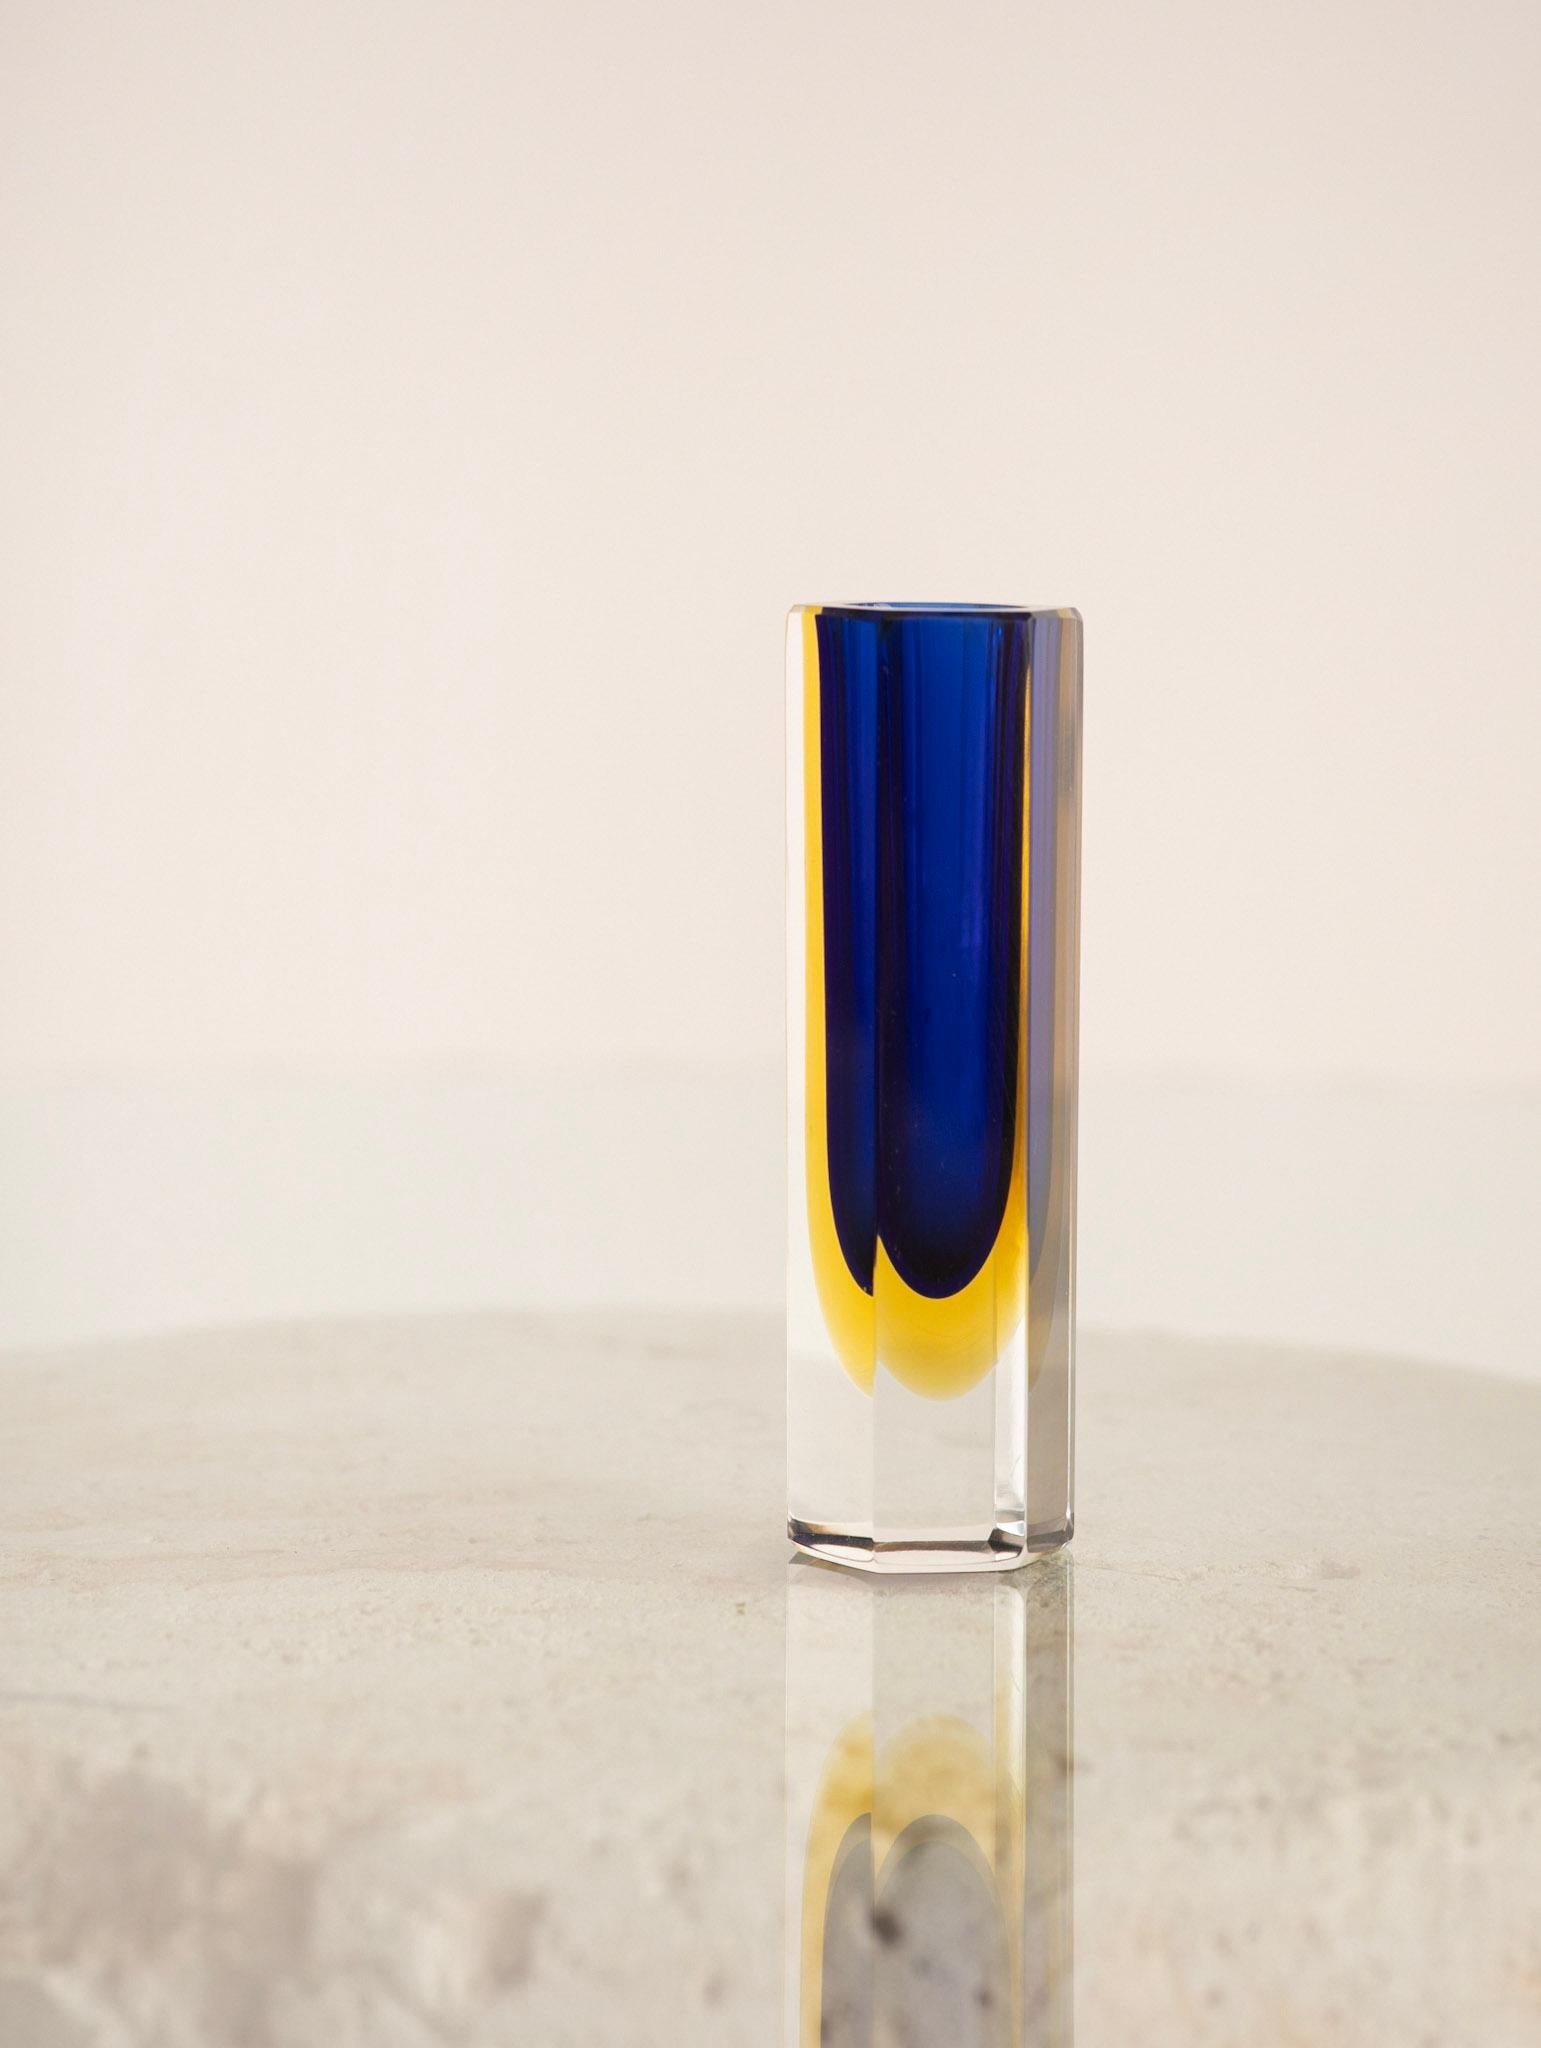 Mid century Murano sommerso glass vase. Petite in size. Cut facets show inner cobalt and yellow colors. Neck opening measures 1.25”.

Sommerso is the glassmaking technique of creating two or more layers of contrasting glass without the colors